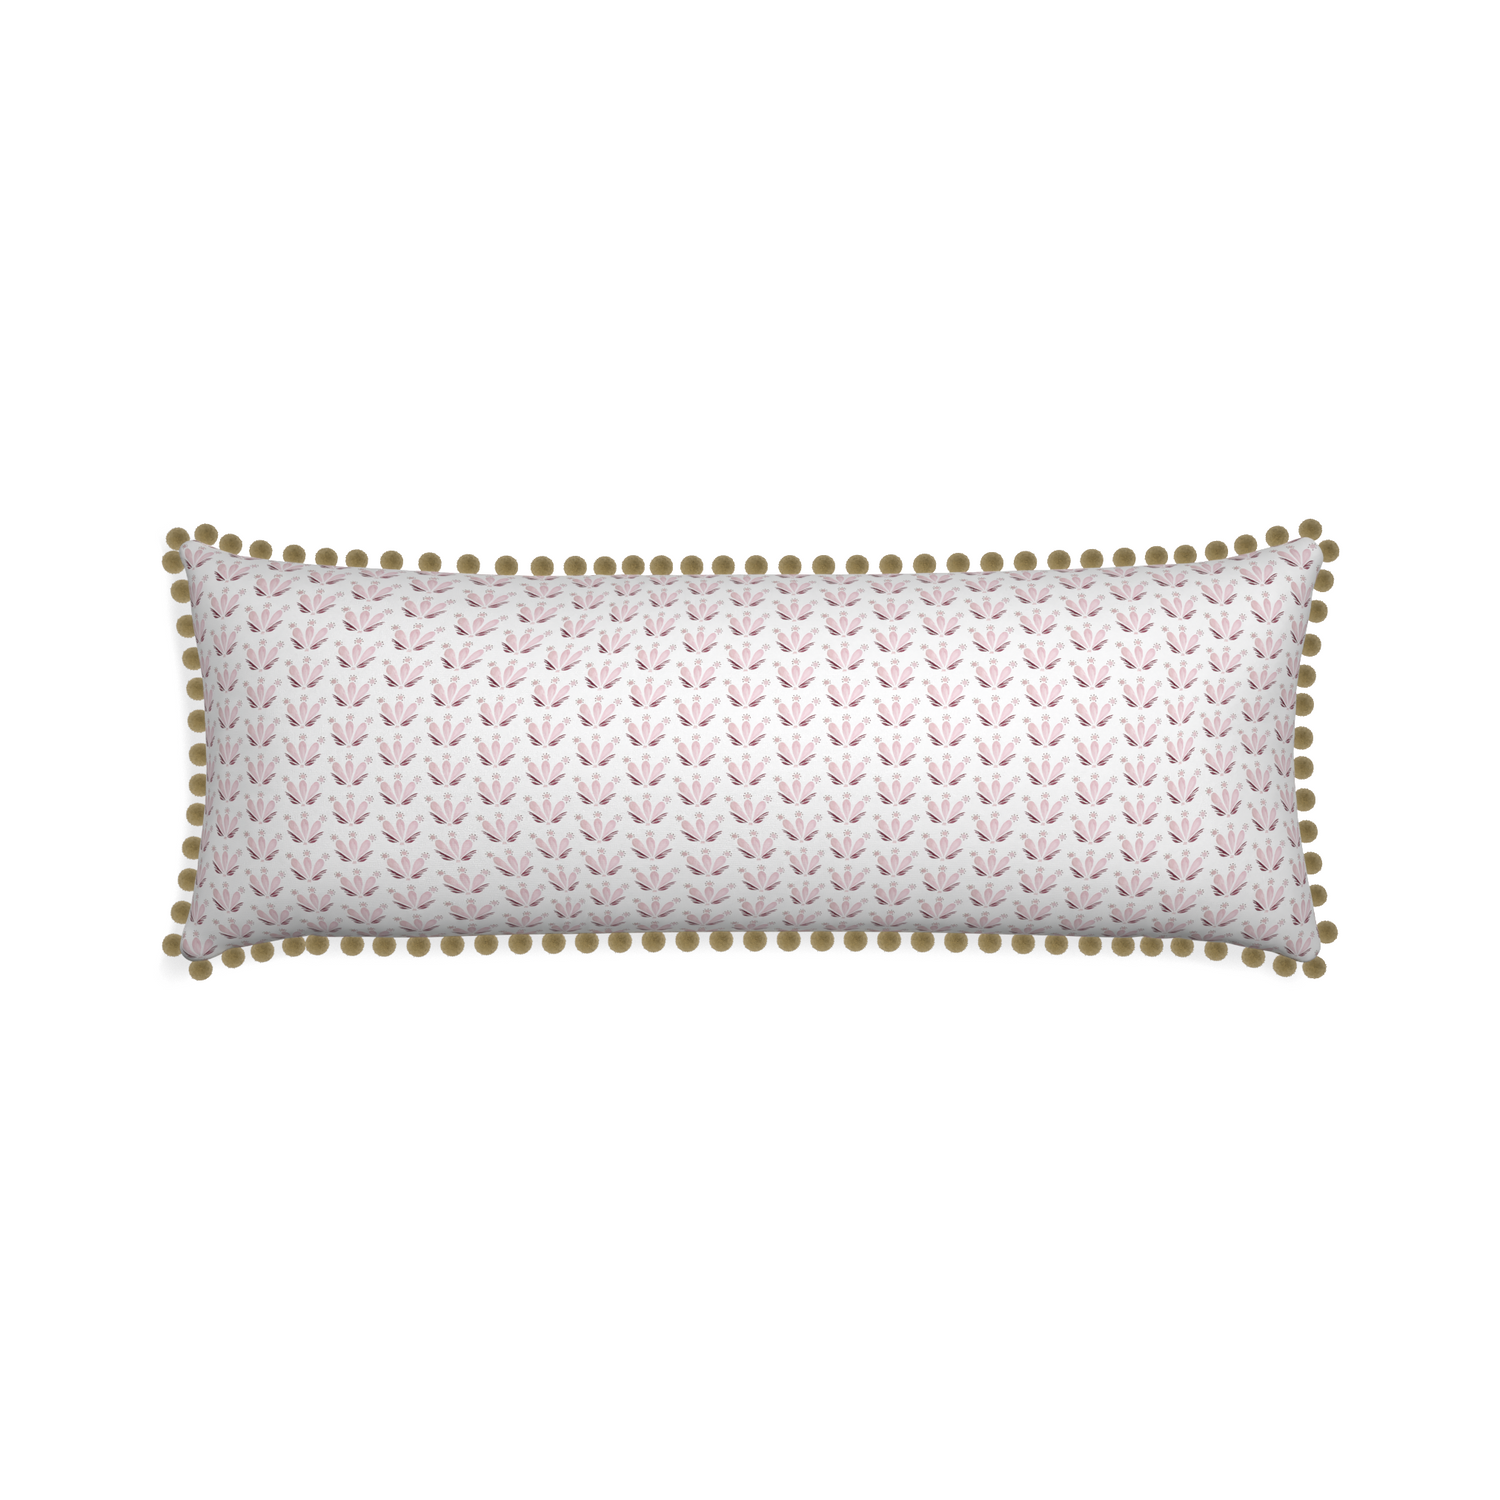 Xl-lumbar serena pink custom pink & burgundy drop repeat floralpillow with olive pom pom on white background